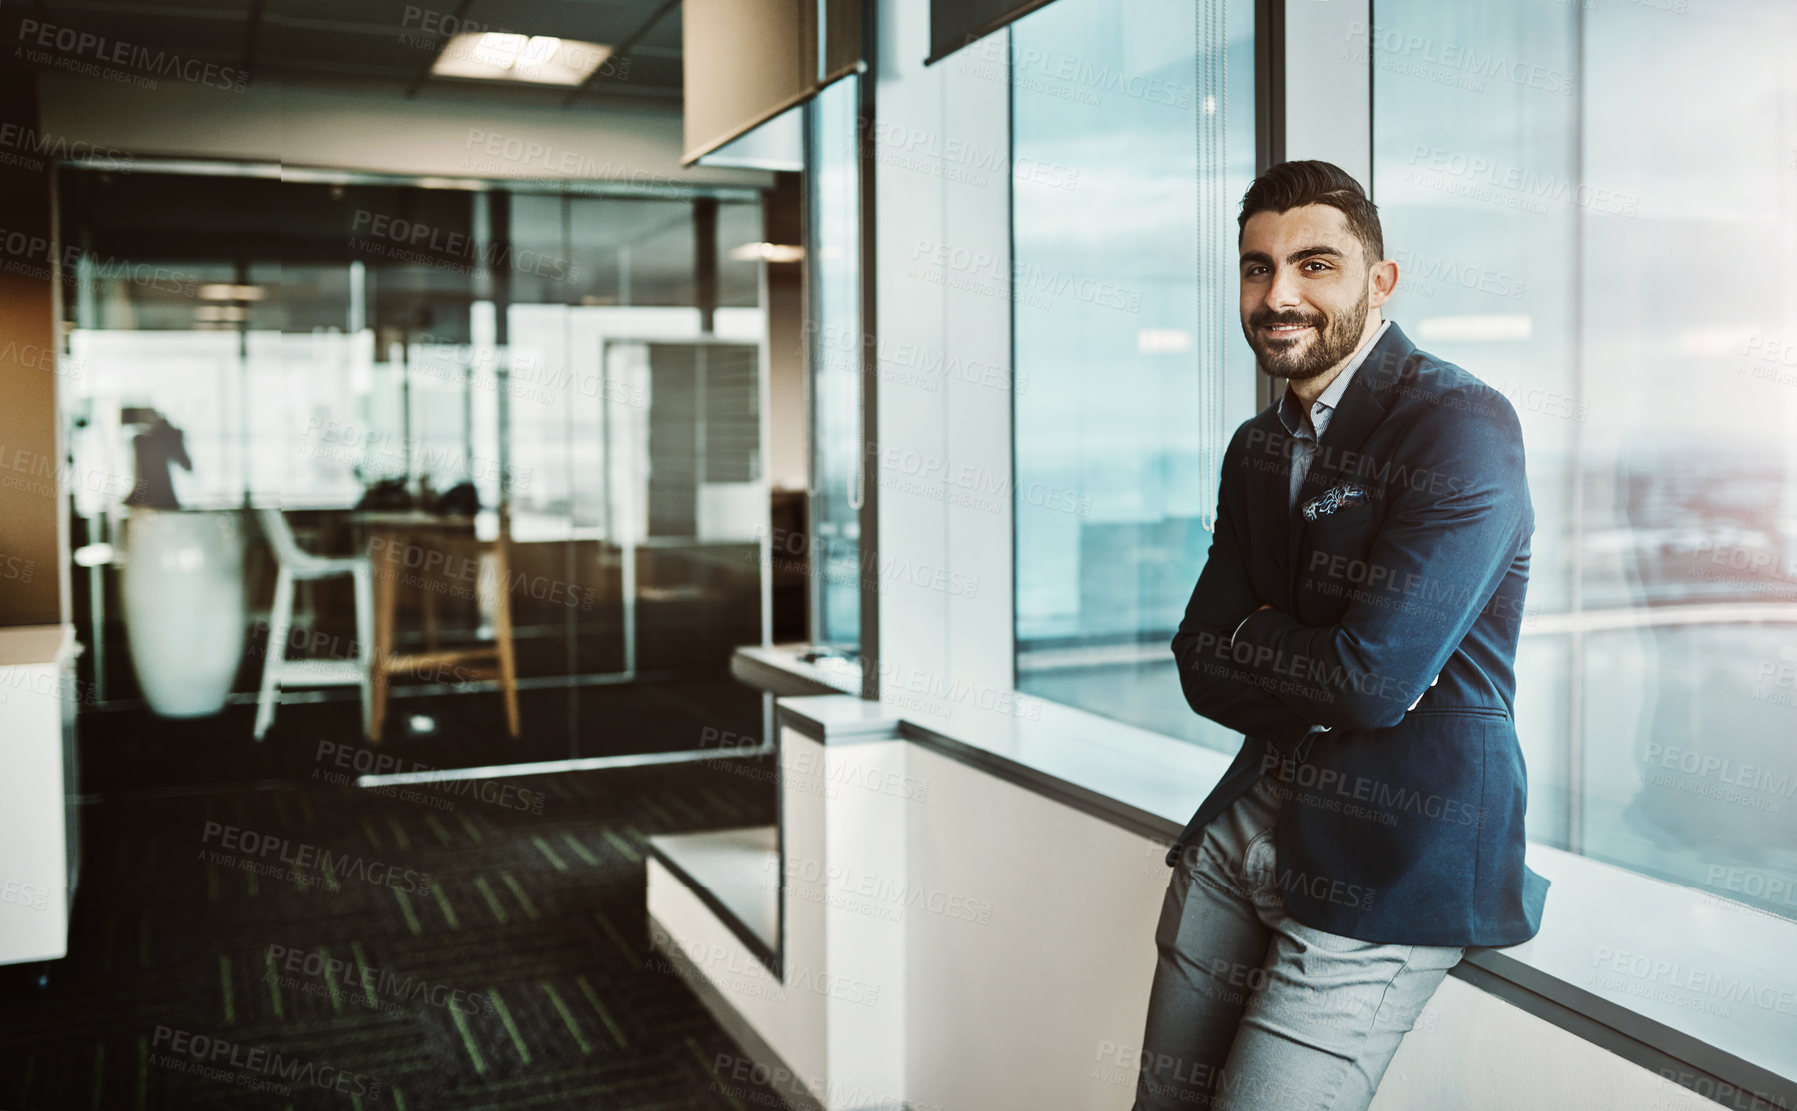 Buy stock photo Portrait of a confident young businessman working in a modern office